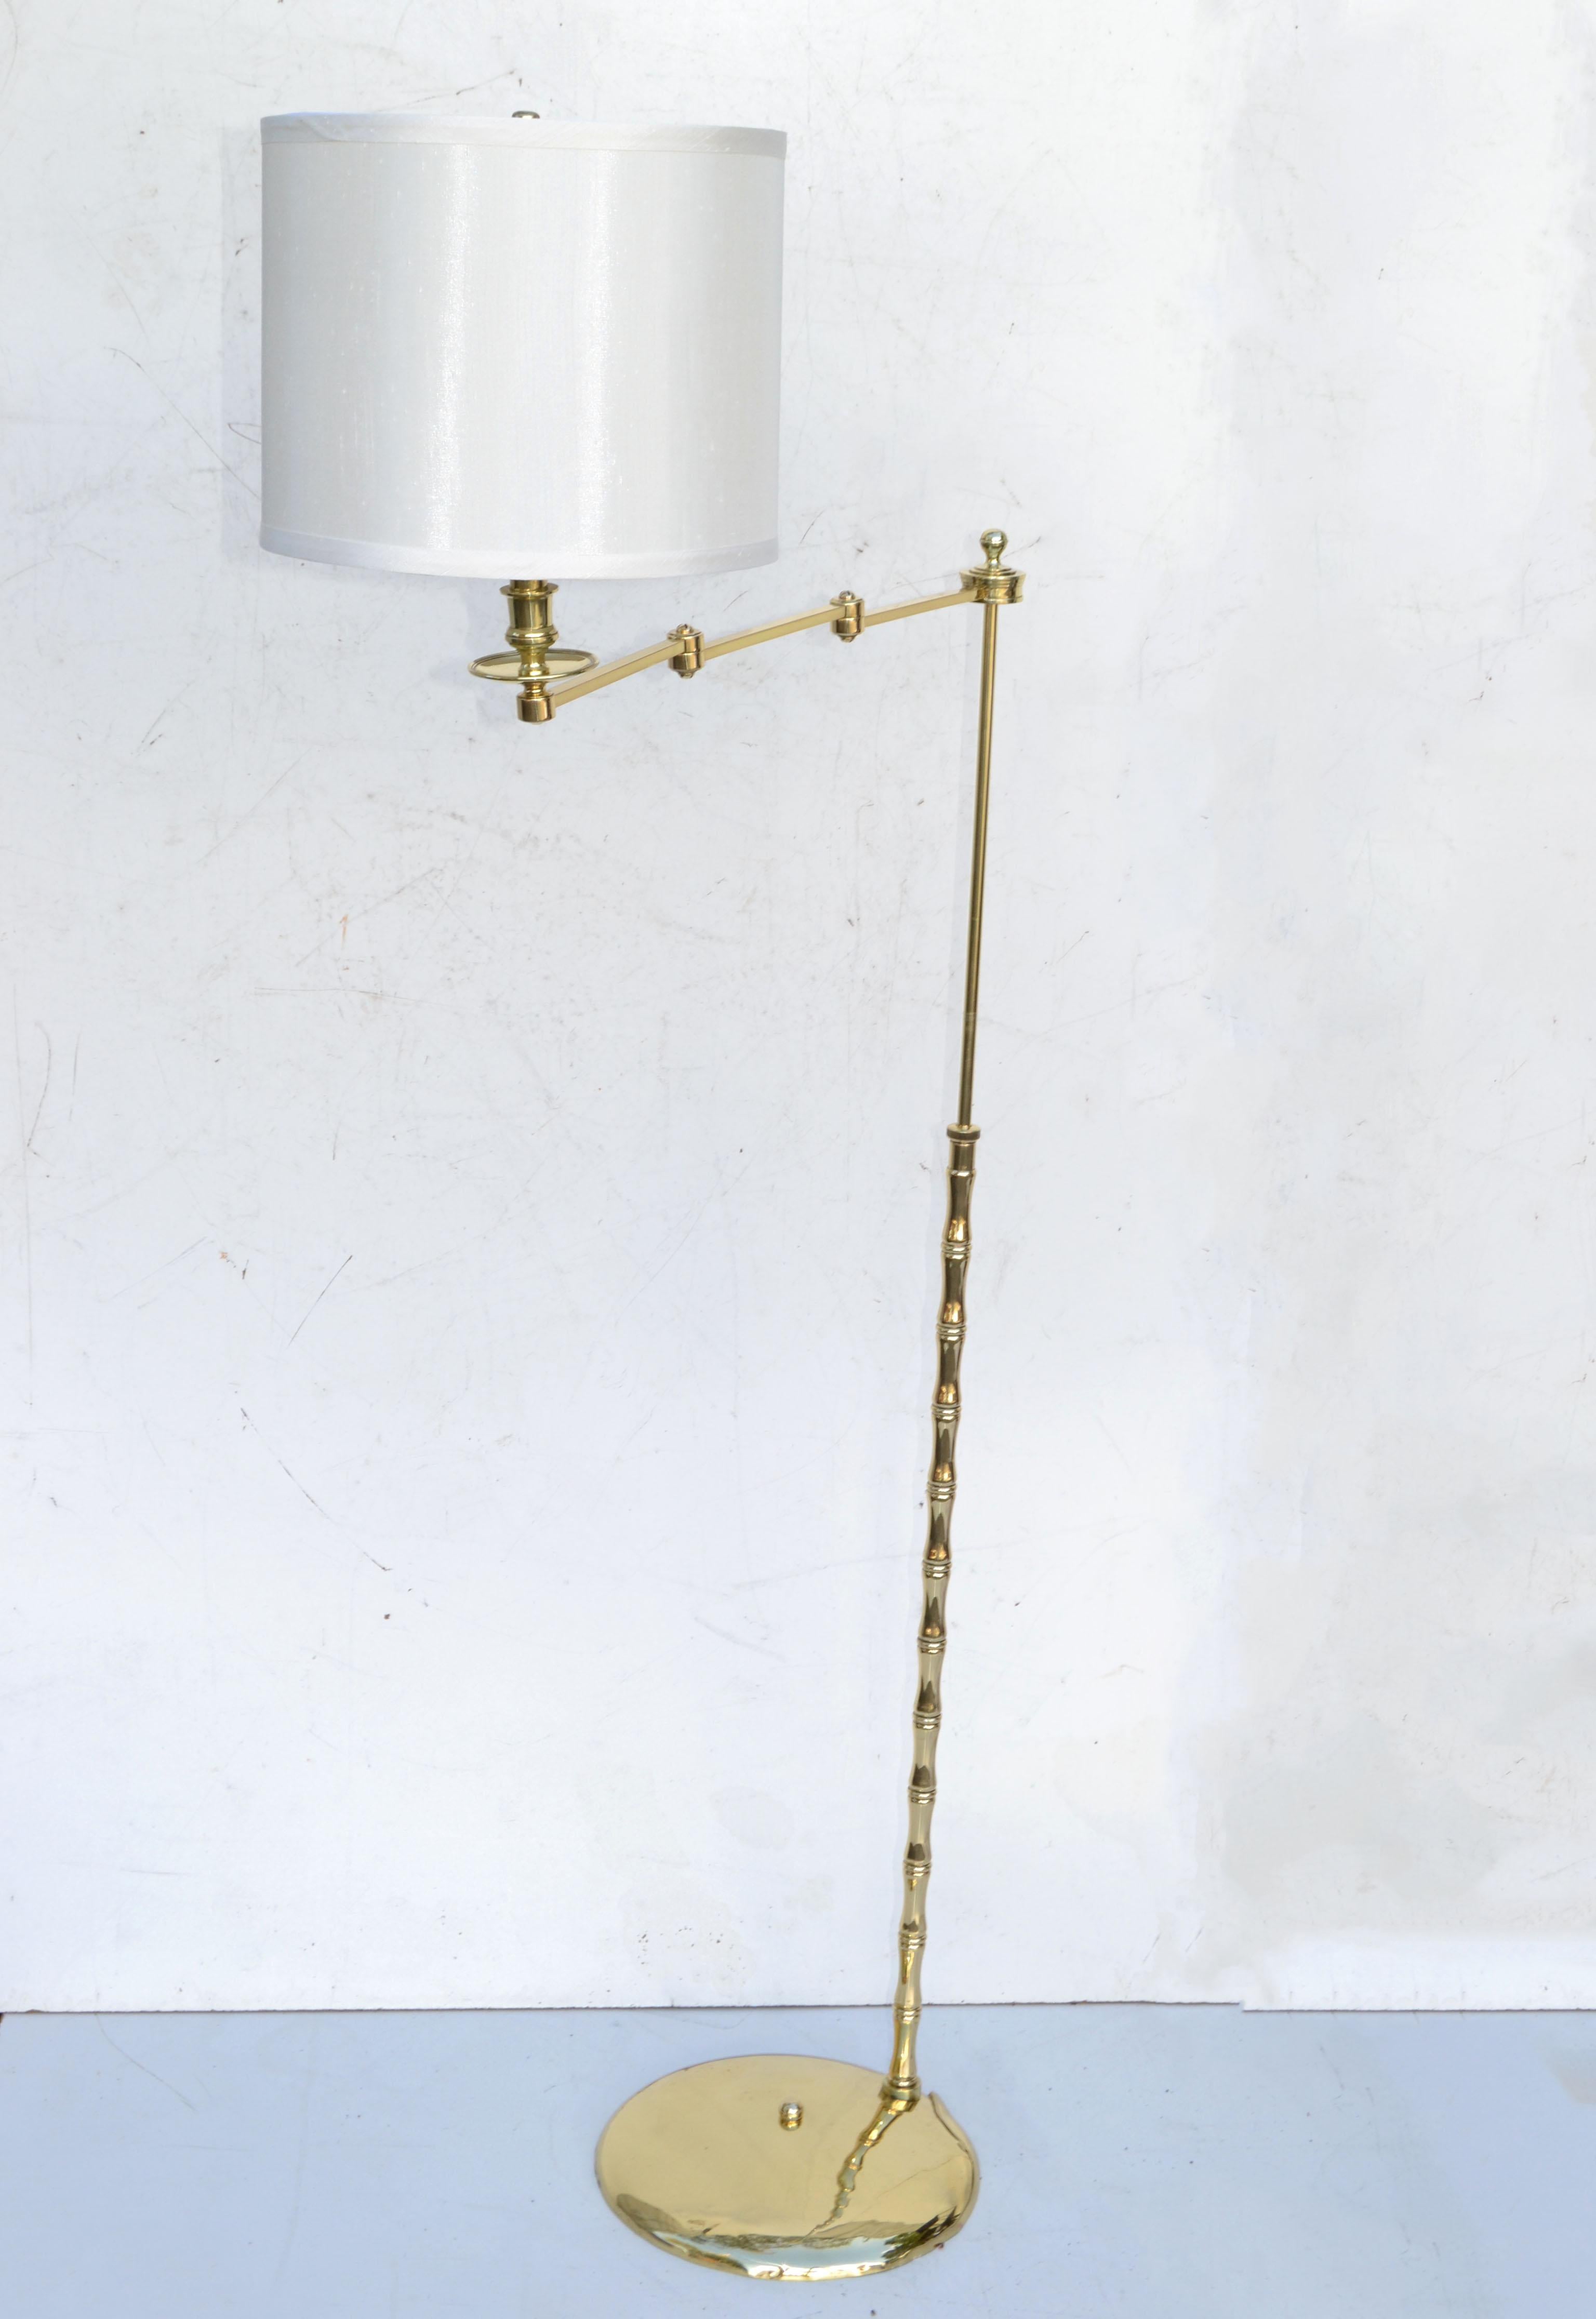 Original French Mid-Century Modern polished bronze & brass retractable floor lamp by Maison Jansen made in France 1960.
Perfect working condition and takes one regular Light bulb.
Sold with custom made beige drum shade.
Measurement Shade: